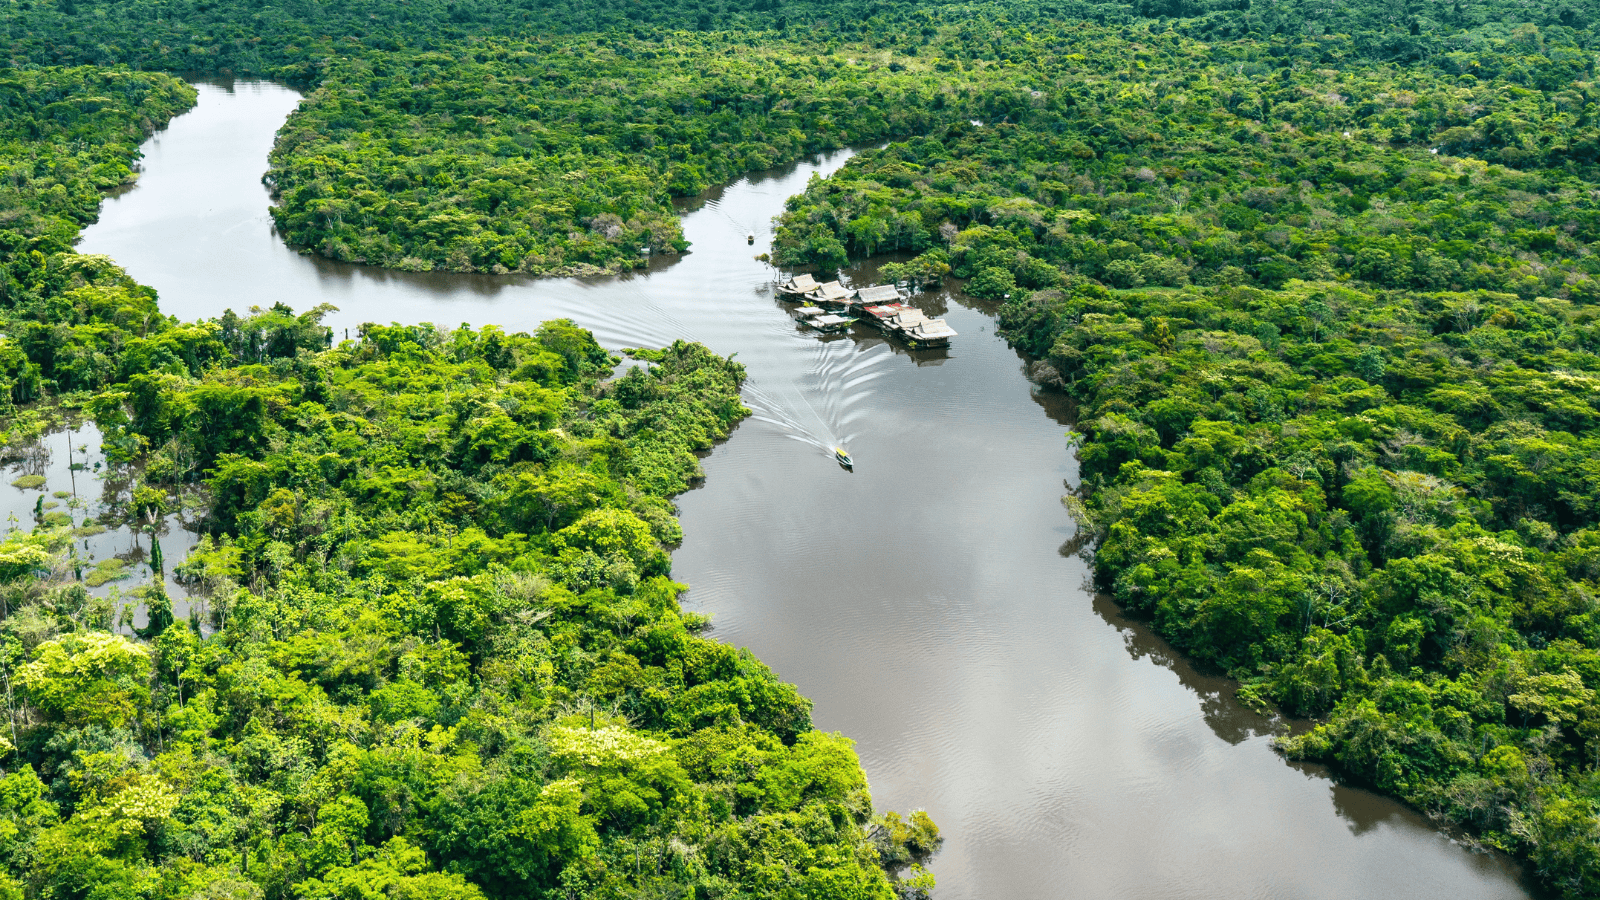 <p>The <a href="https://www.delfinamazoncruises.com/our-cruises/delfin-iii/" rel="nofollow external noopener noreferrer">Delfin III</a> is a classy river tour of Peruvian Amazonia. This region encompasses portions of the Amazon jungle and is famous for its flora and fauna. Delfin Amazon Cruises allows guests to immerse themselves in the rainforest setting while maintaining high standards of luxury. </p><p>Suites on the Delfin III are chic and equipped with plush amenities, like floor-to-ceiling windows and fine cotton bedspreads. Optional excursions during your three- or four-night trip include kayaking, bird-watching, and hiking. When not exploring the Amazon rainforest, recharge at the ship’s pool, gym, or spa.</p>